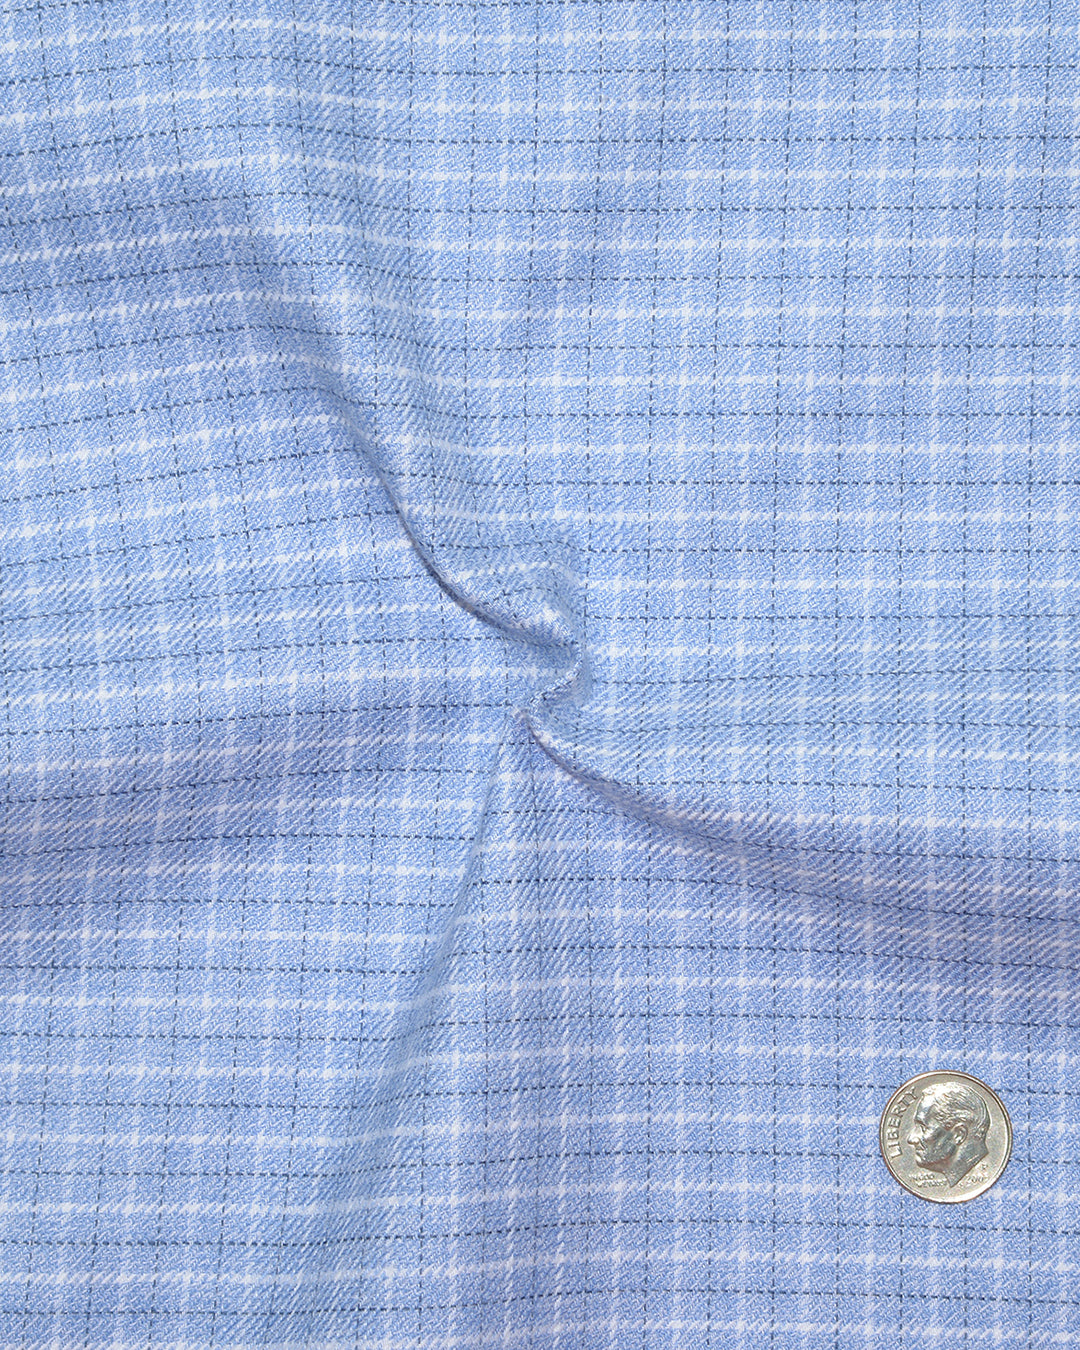 Closeup view of custom check shirts for men by Luxire dark blue light blue and white